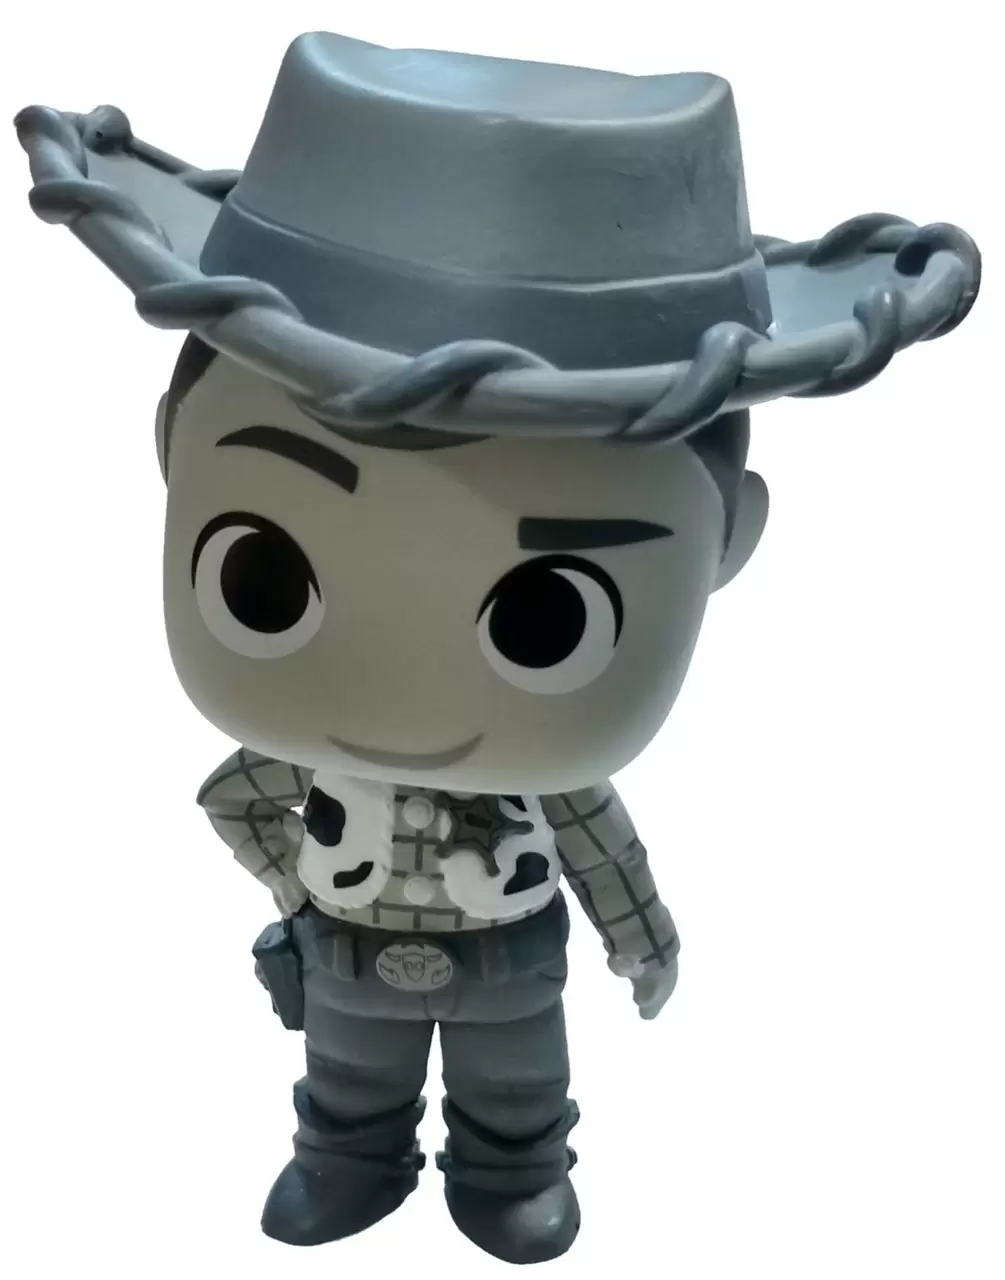 Mystery Minis - Toy story 4 - Woody Black and White